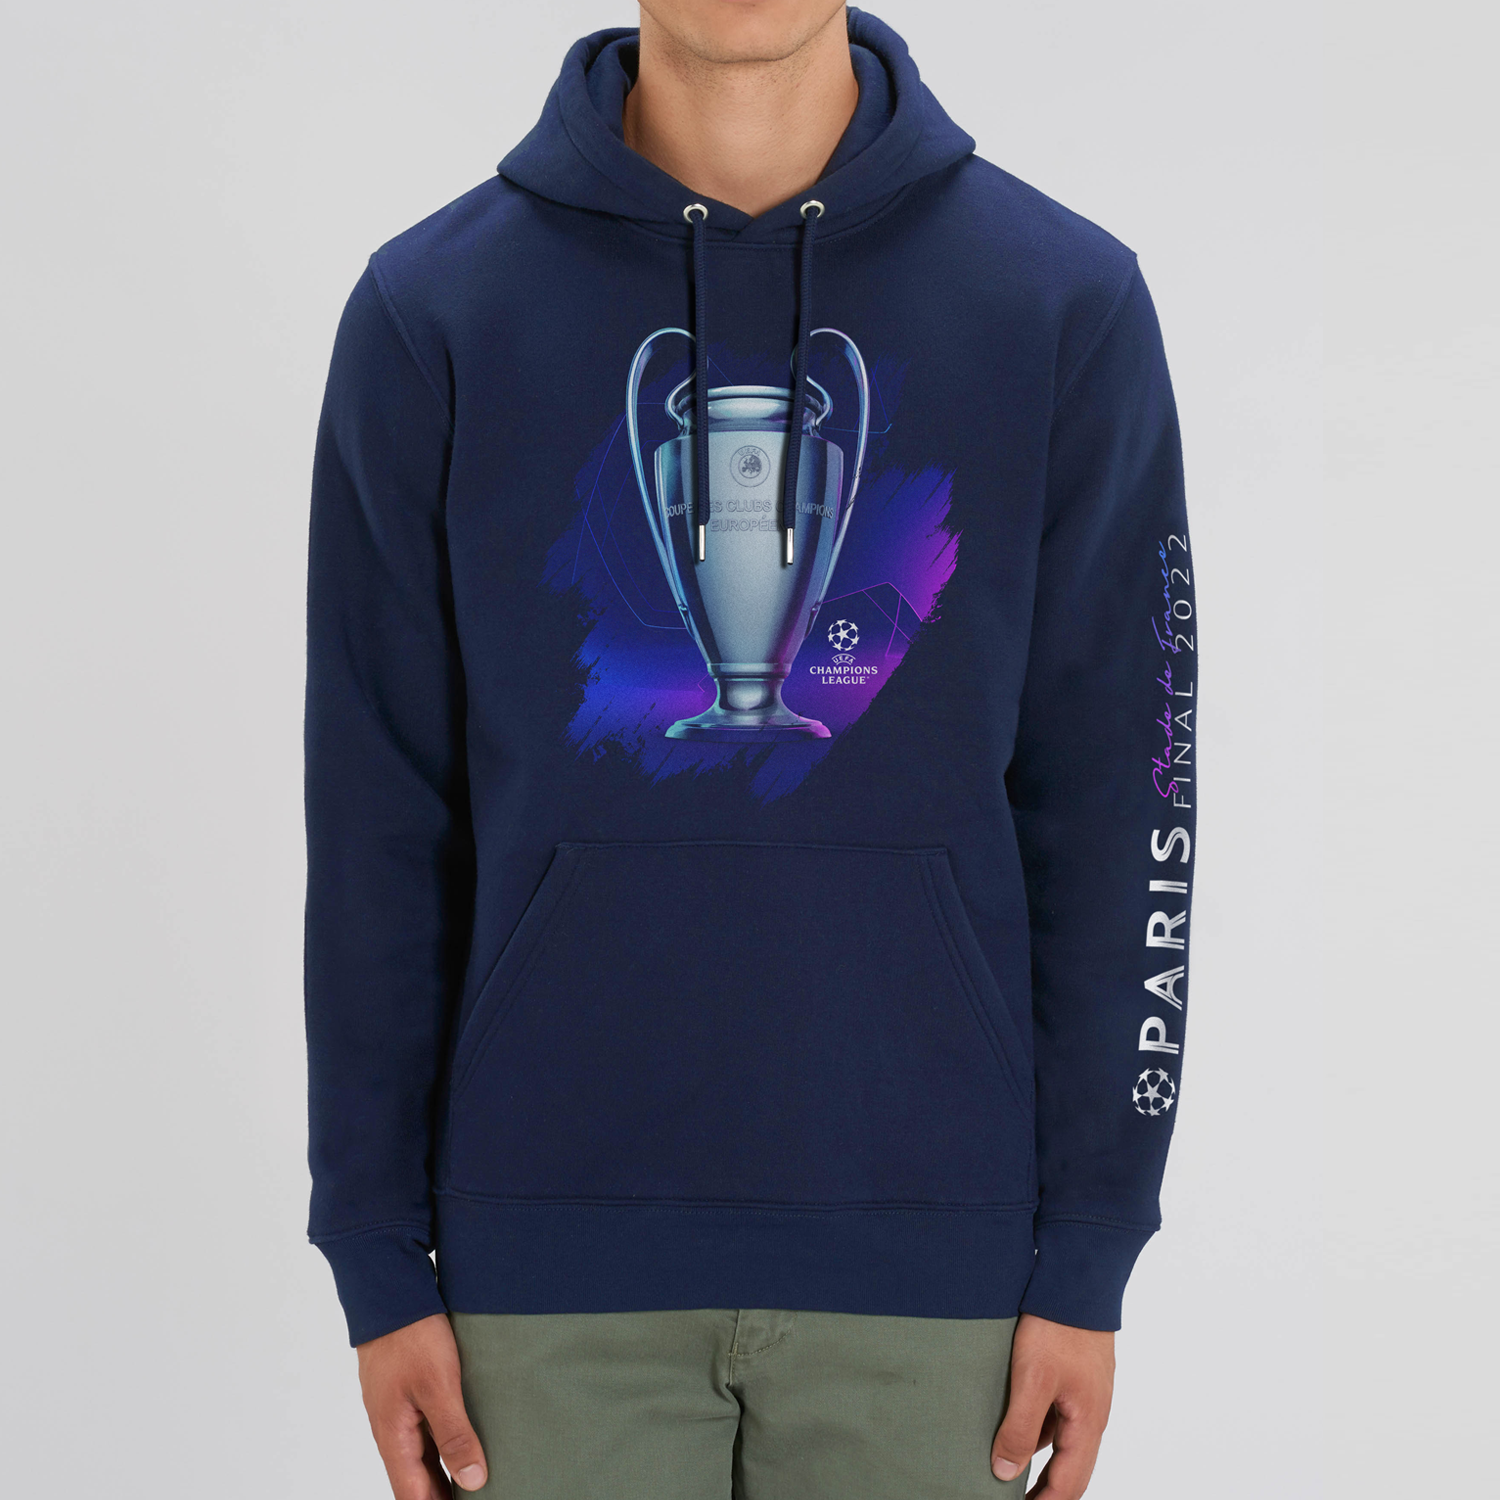 UCL Final 2022 Trophy Hoodie UEFA Club Competitions Online Store